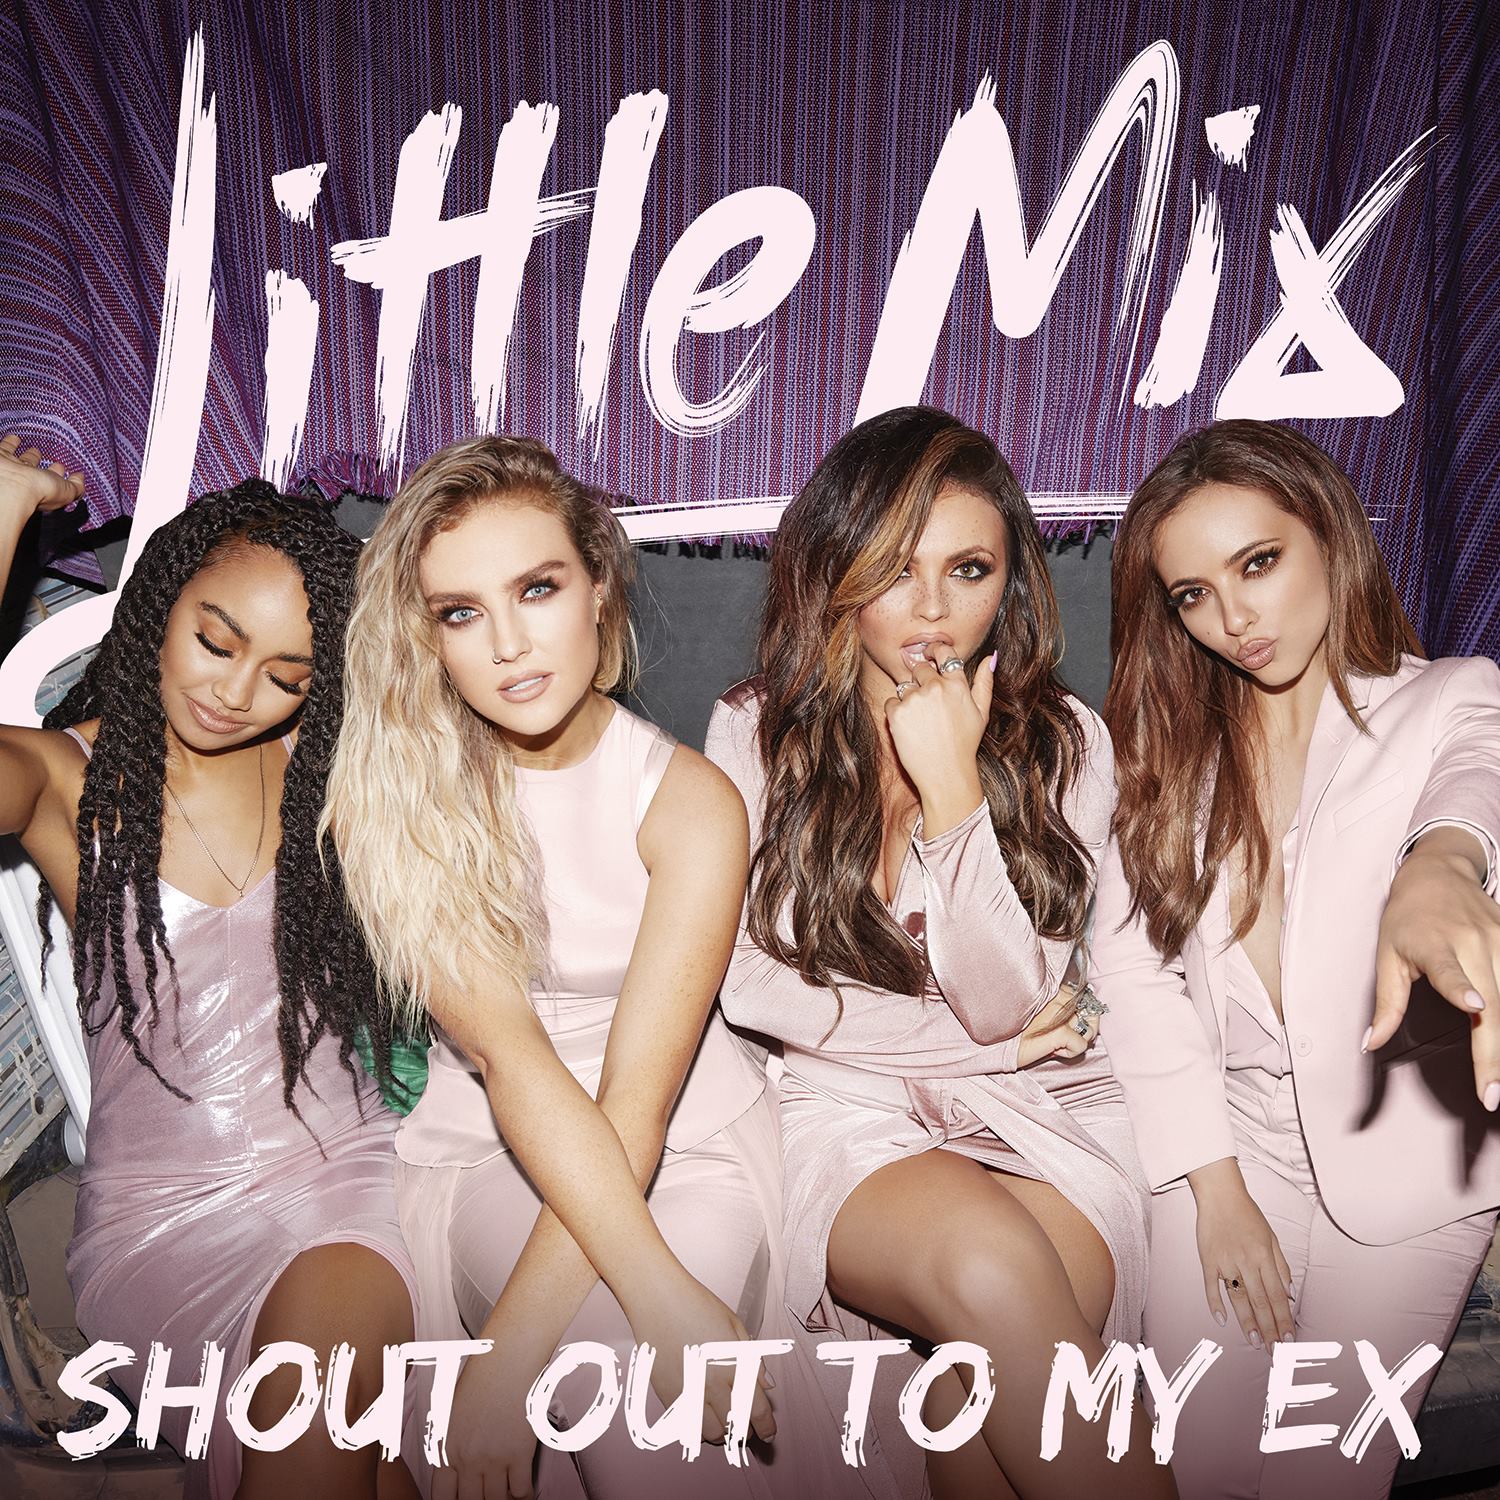 Little Mix - Shout Out To My Ex single cover